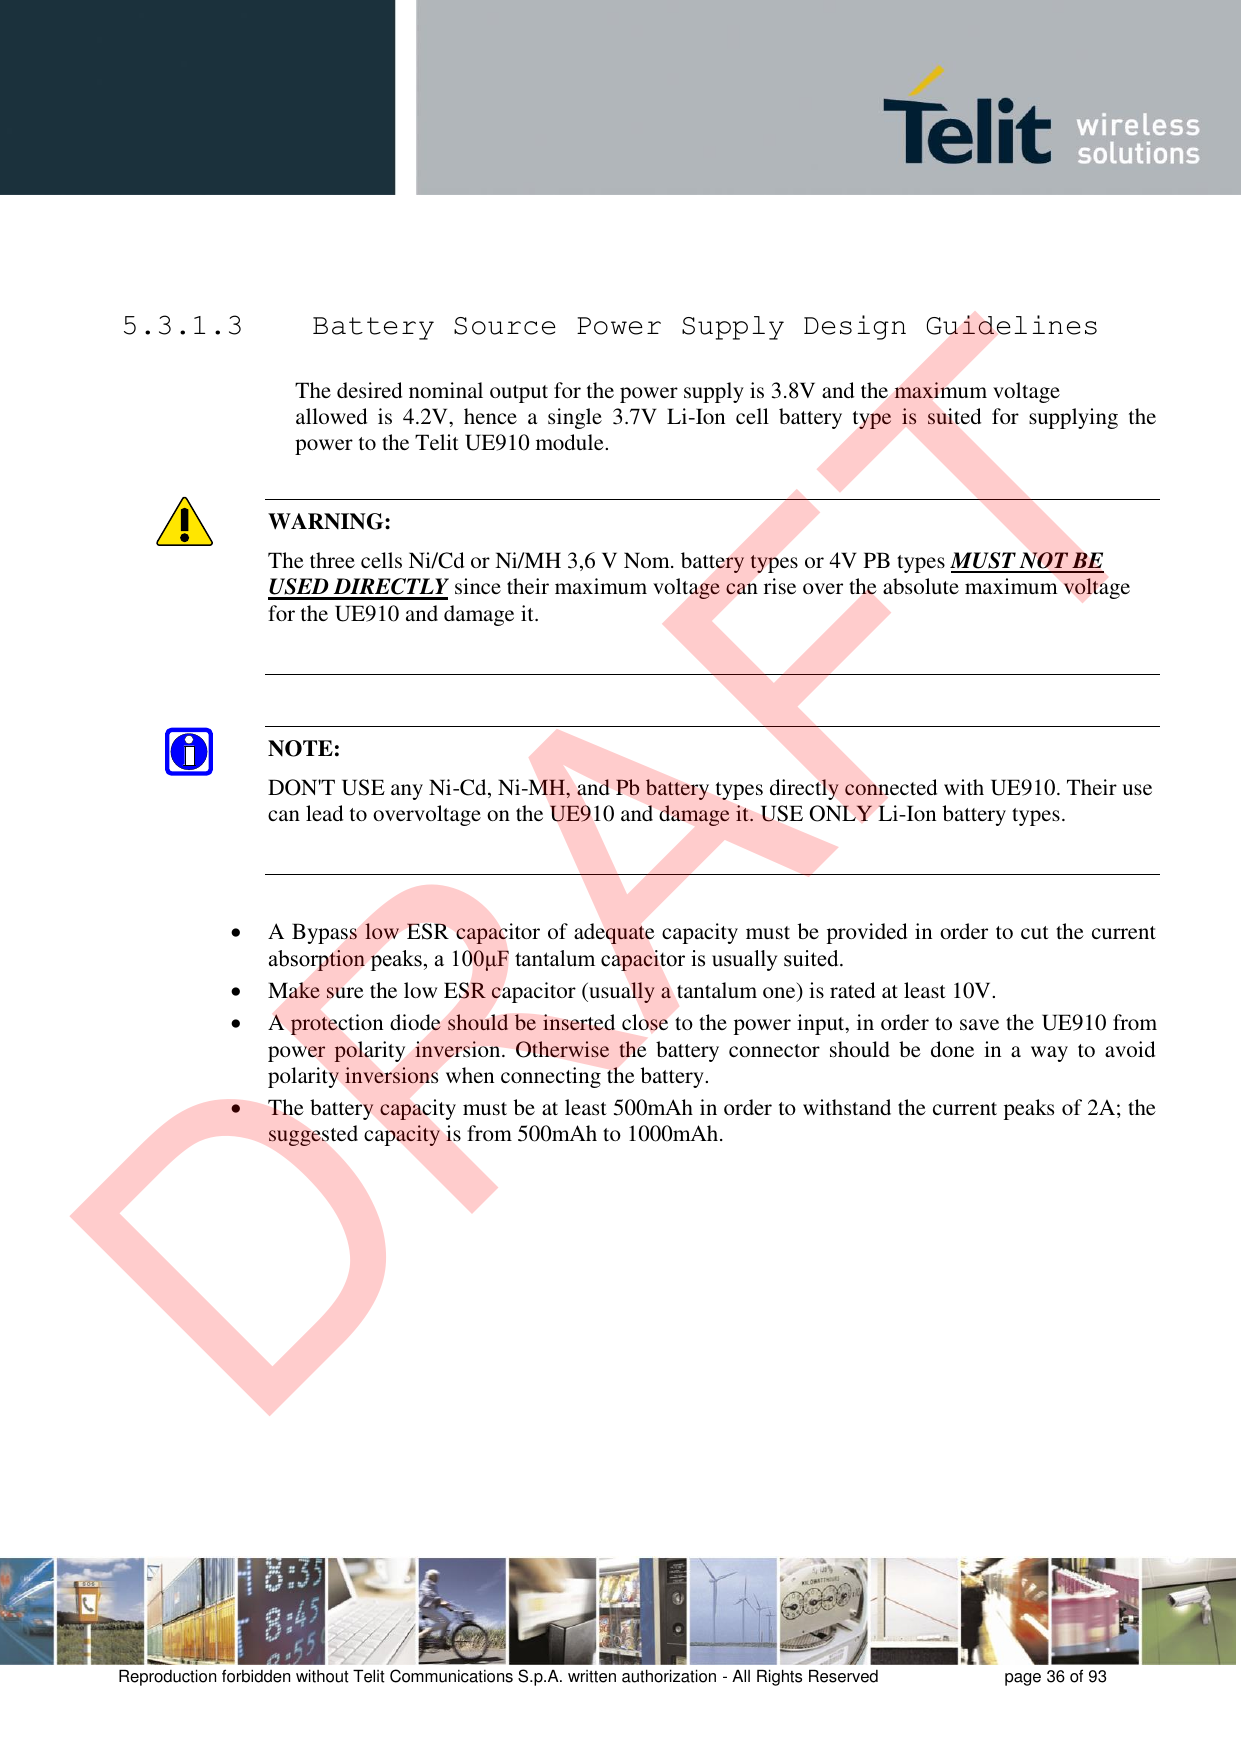 Reproduction forbidden without Telit Communications S.p.A. written authorization - All Rights Reserved  page 36 of 93 5.3.1.3  Battery Source Power Supply Design Guidelines The desired nominal output for the power supply is 3.8V and the maximum voltage  allowed  is  4.2V,  hence  a  single  3.7V  Li-Ion  cell  battery  type  is  suited  for  supplying  the power to the Telit UE910 module. WARNING: The three cells Ni/Cd or Ni/MH 3,6 V Nom. battery types or 4V PB types MUST NOT BE USED DIRECTLY since their maximum voltage can rise over the absolute maximum voltage for the UE910 and damage it. NOTE: DON&apos;T USE any Ni-Cd, Ni-MH, and Pb battery types directly connected with UE910. Their use can lead to overvoltage on the UE910 and damage it. USE ONLY Li-Ion battery types. A Bypass low ESR capacitor of adequate capacity must be provided in order to cut the currentabsorption peaks, a 100μF tantalum capacitor is usually suited.Make sure the low ESR capacitor (usually a tantalum one) is rated at least 10V.A protection diode should be inserted close to the power input, in order to save the UE910 frompower  polarity inversion. Otherwise  the battery  connector should  be done  in a  way to  avoidpolarity inversions when connecting the battery.The battery capacity must be at least 500mAh in order to withstand the current peaks of 2A; thesuggested capacity is from 500mAh to 1000mAh.DRAFT